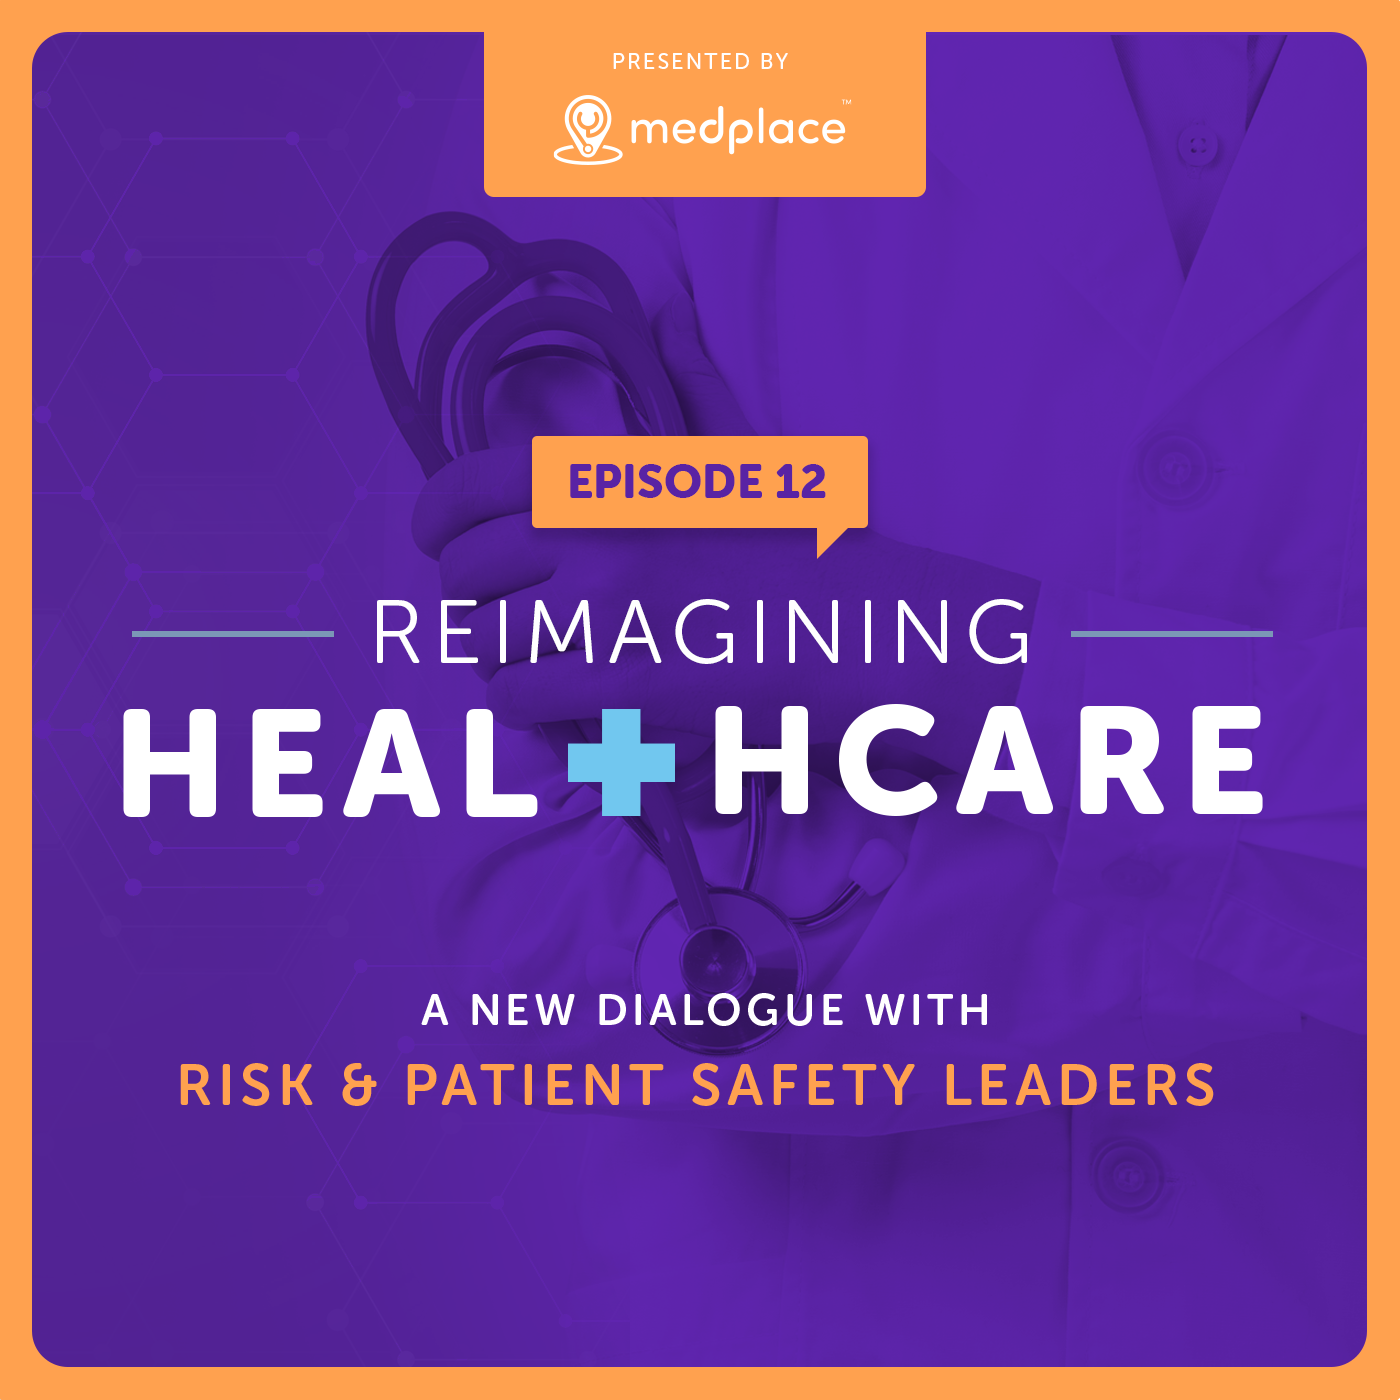 Episode 12 - Reimagining Healthcare - A New Dialogue with Risk and Patient Safety Leaders